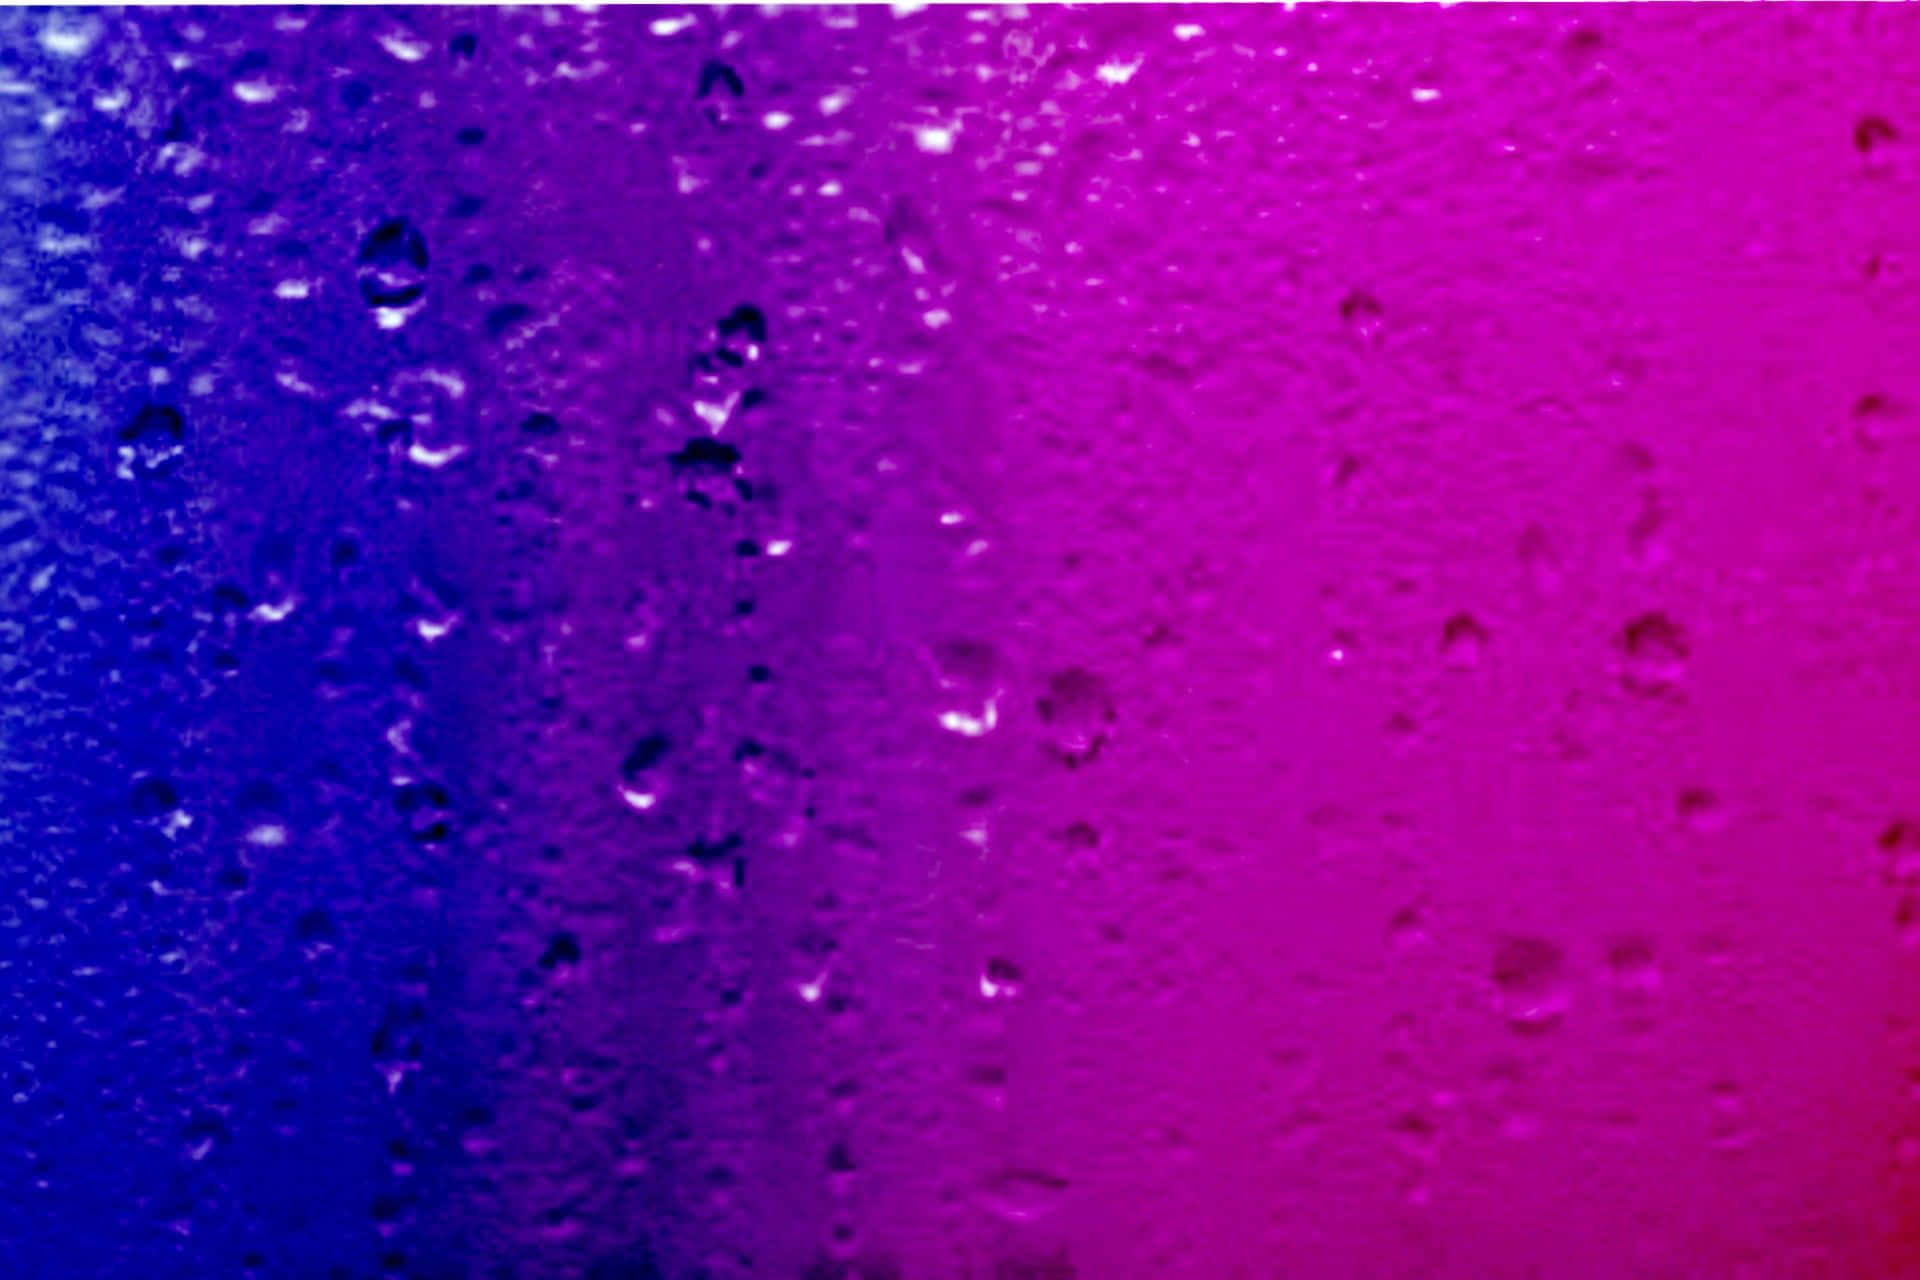 A beautiful and vibrant pink and blue abstract background